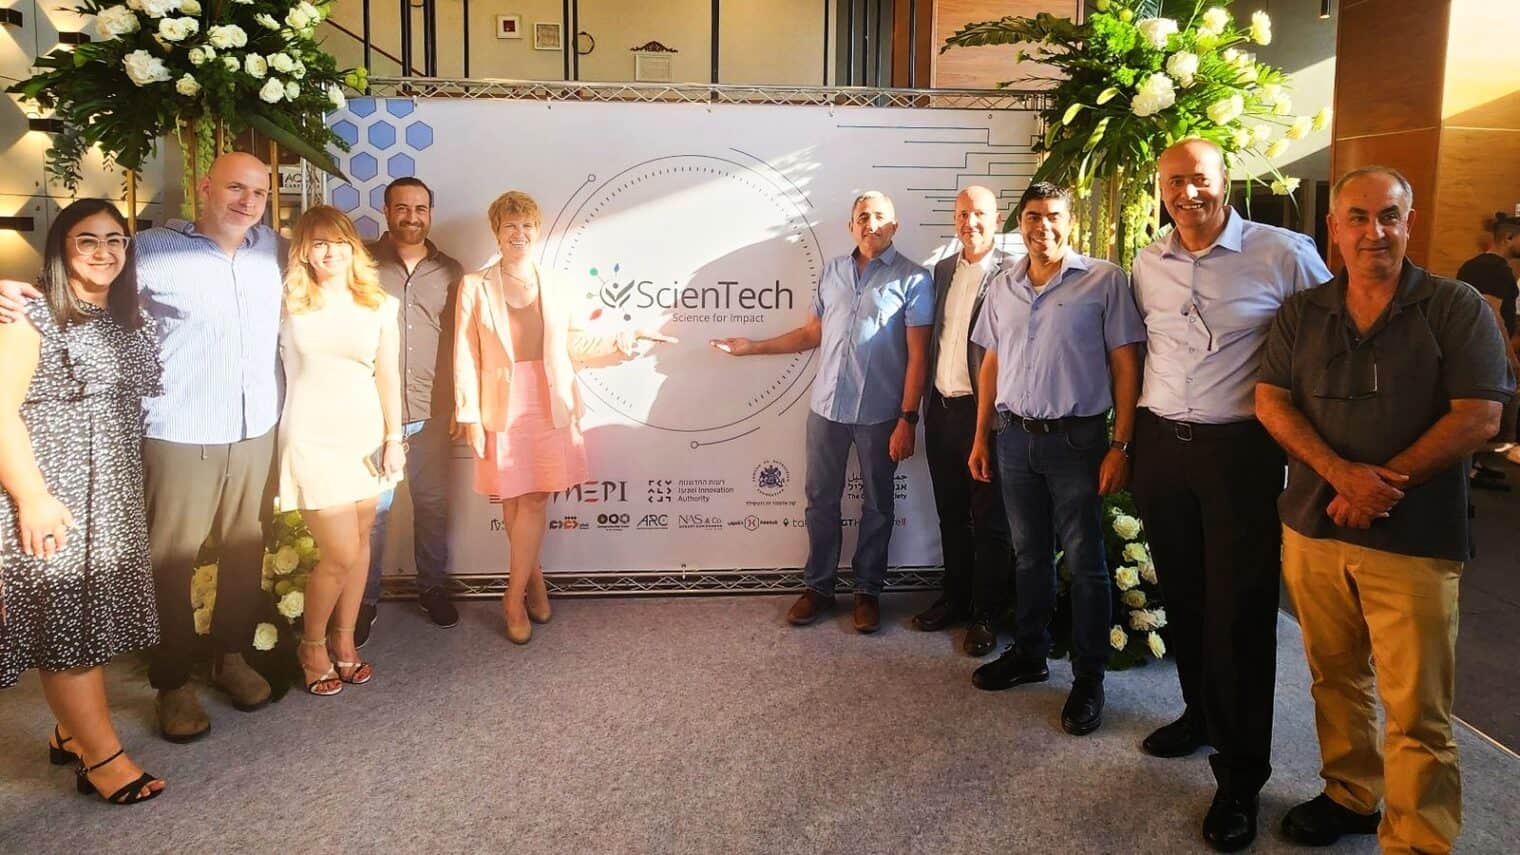 Participants and managers of ScienTech. Photo courtesy of the Galilee Society